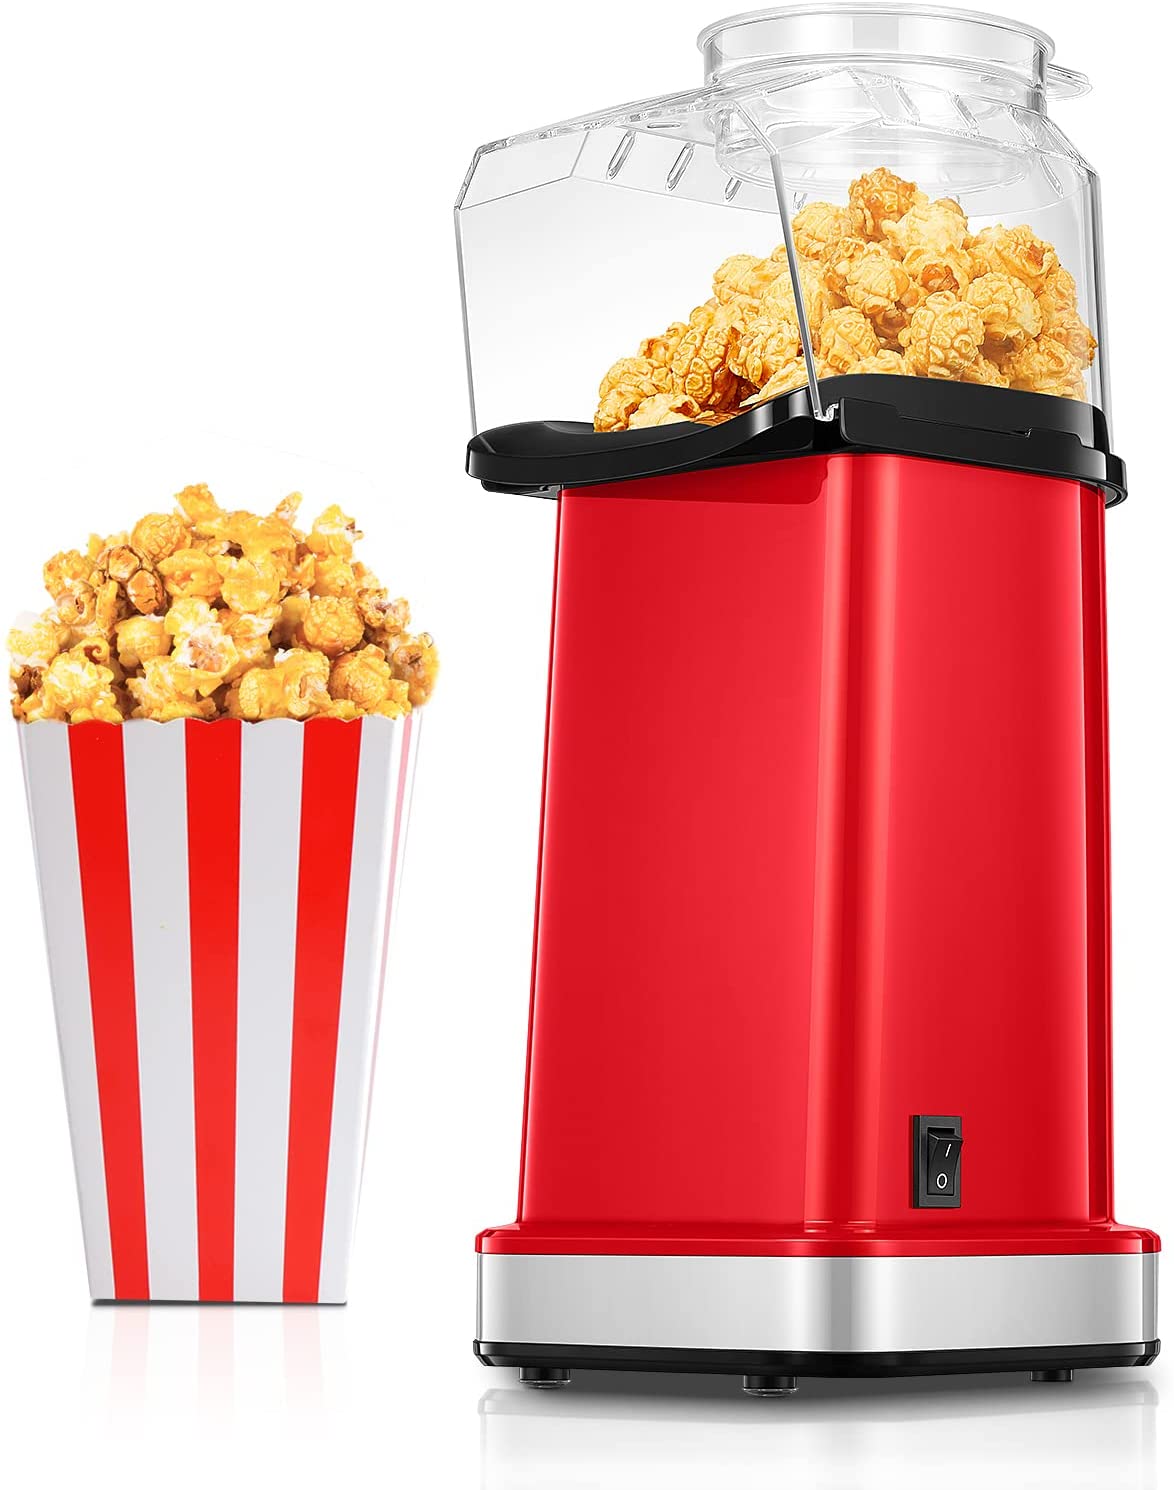 Electric Popcorn Machine with Measuring Cup, Hot Air Popcorn